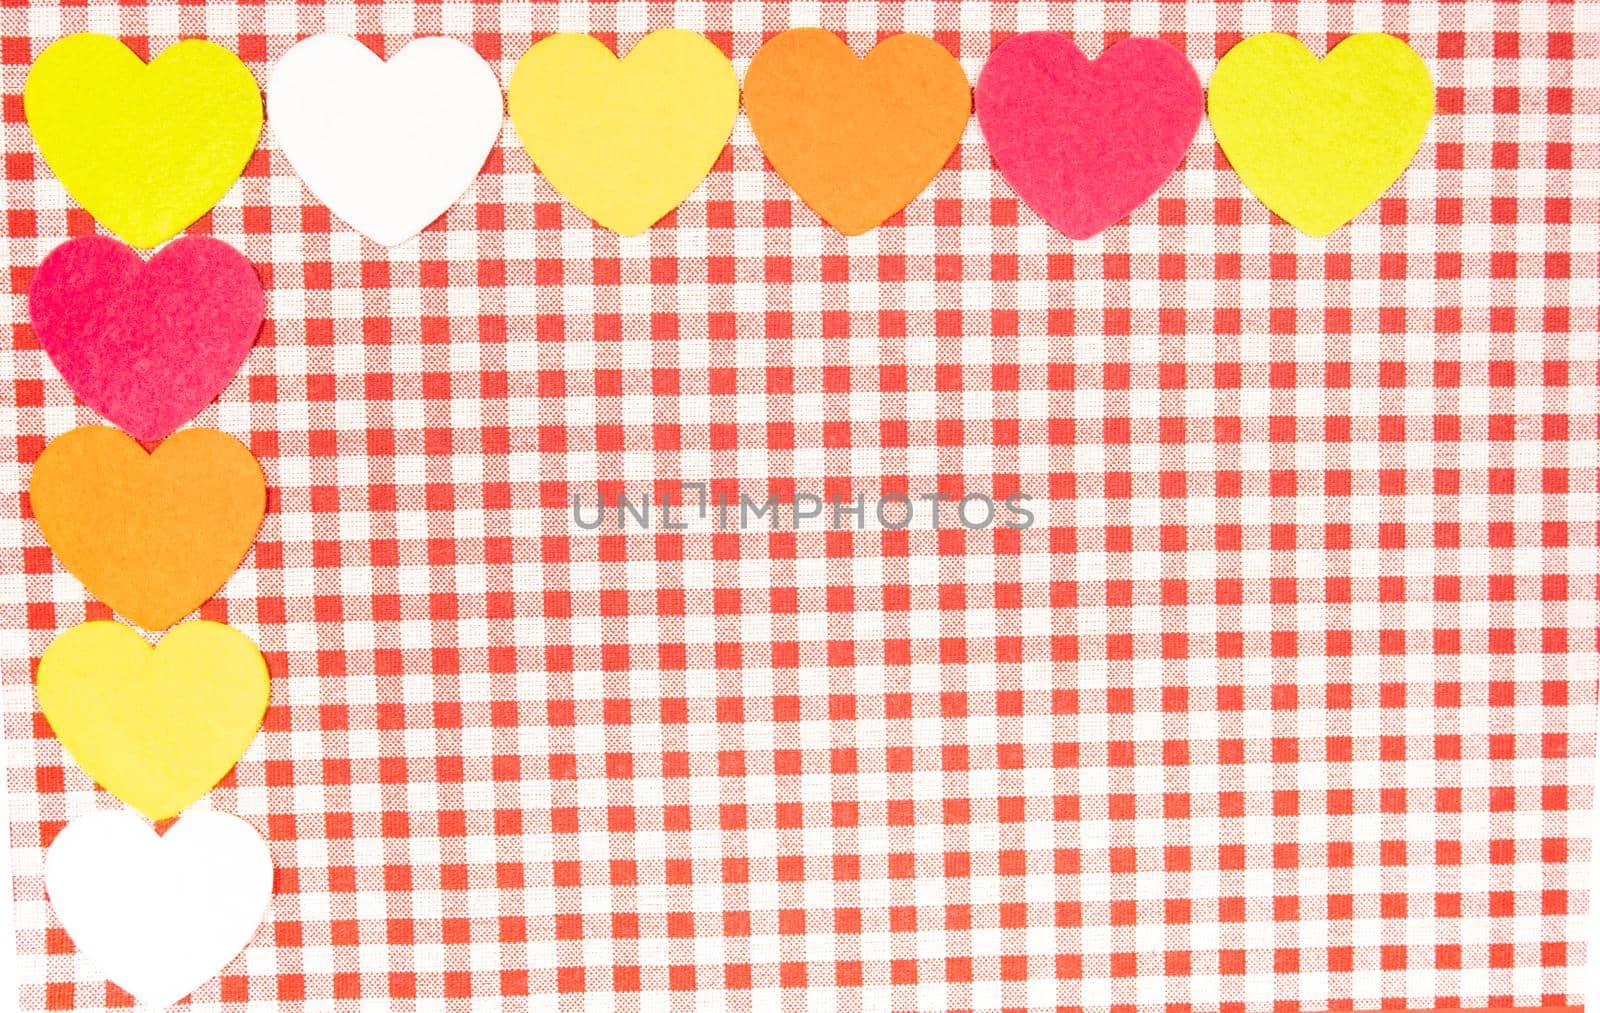 background with red and white Vichy fabric for Valentine's Day with pink, orange, yellow and white hearts. valentines day concept.